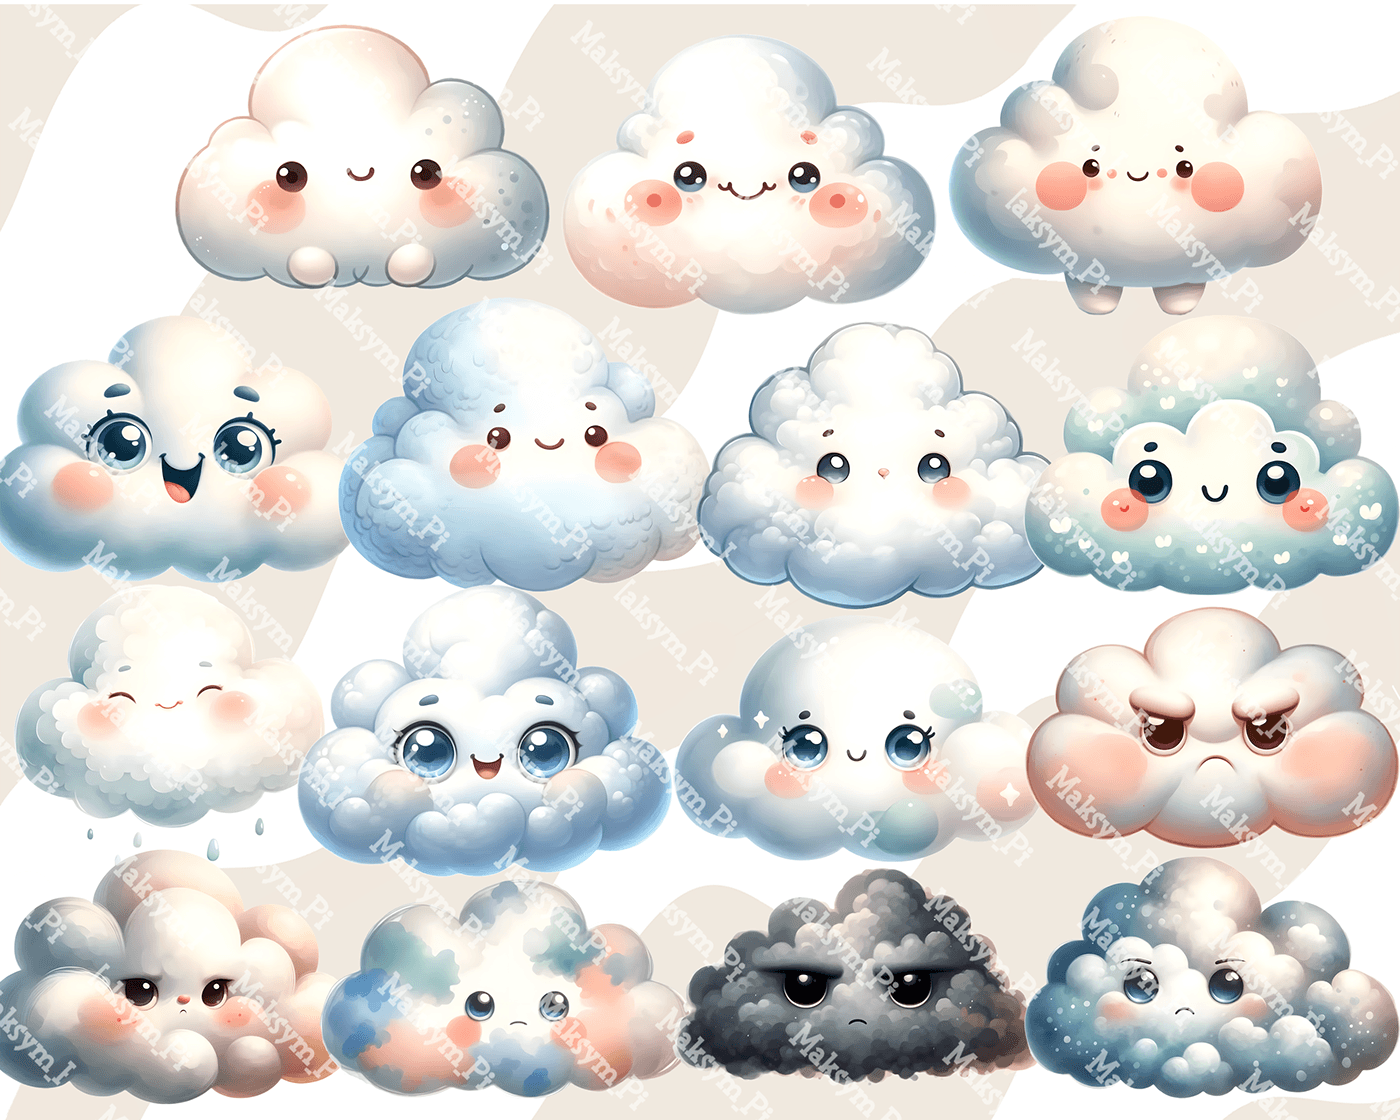 clouds sky clouds clouds cartoon Clouds Clipart clouds funny clouds illustration clouds watercolor clouds whimsical